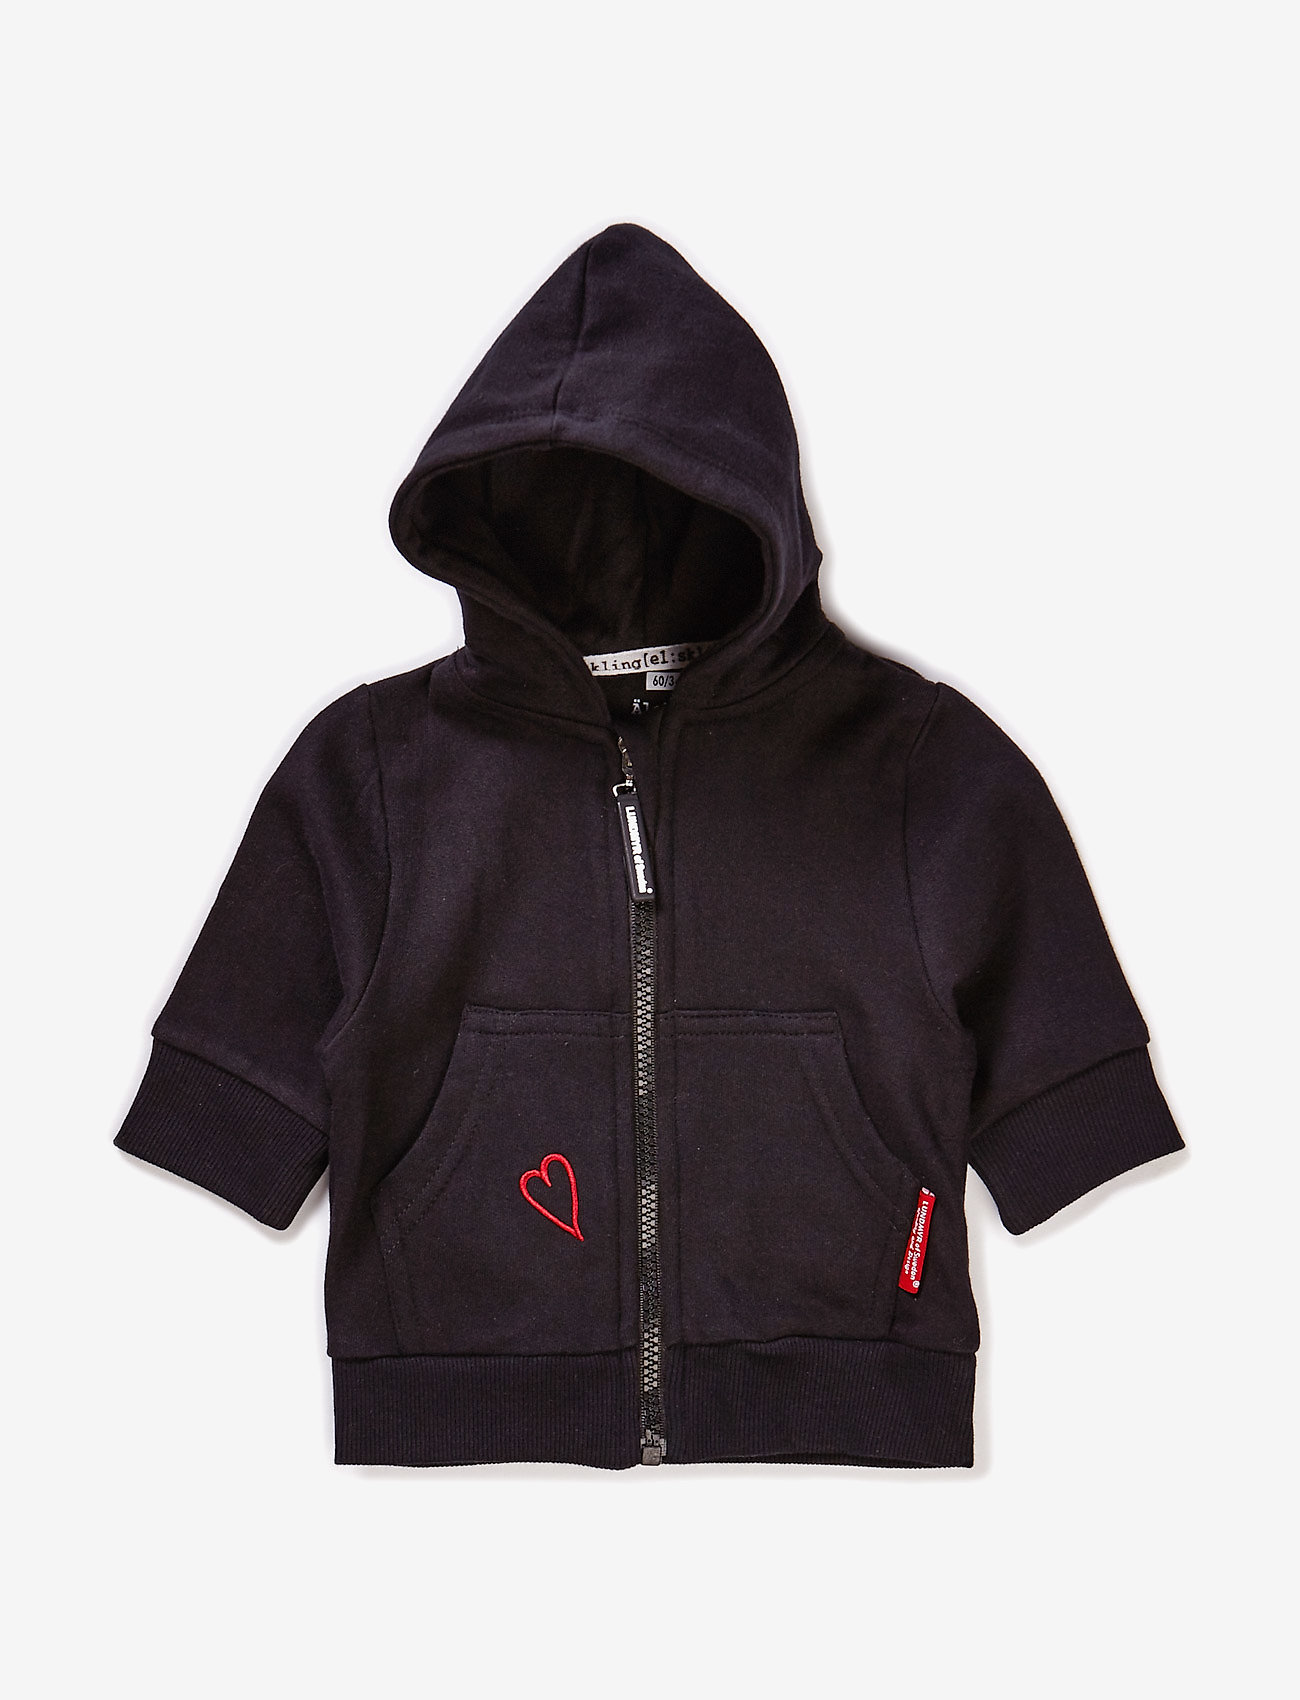 jacket with hoodie attached